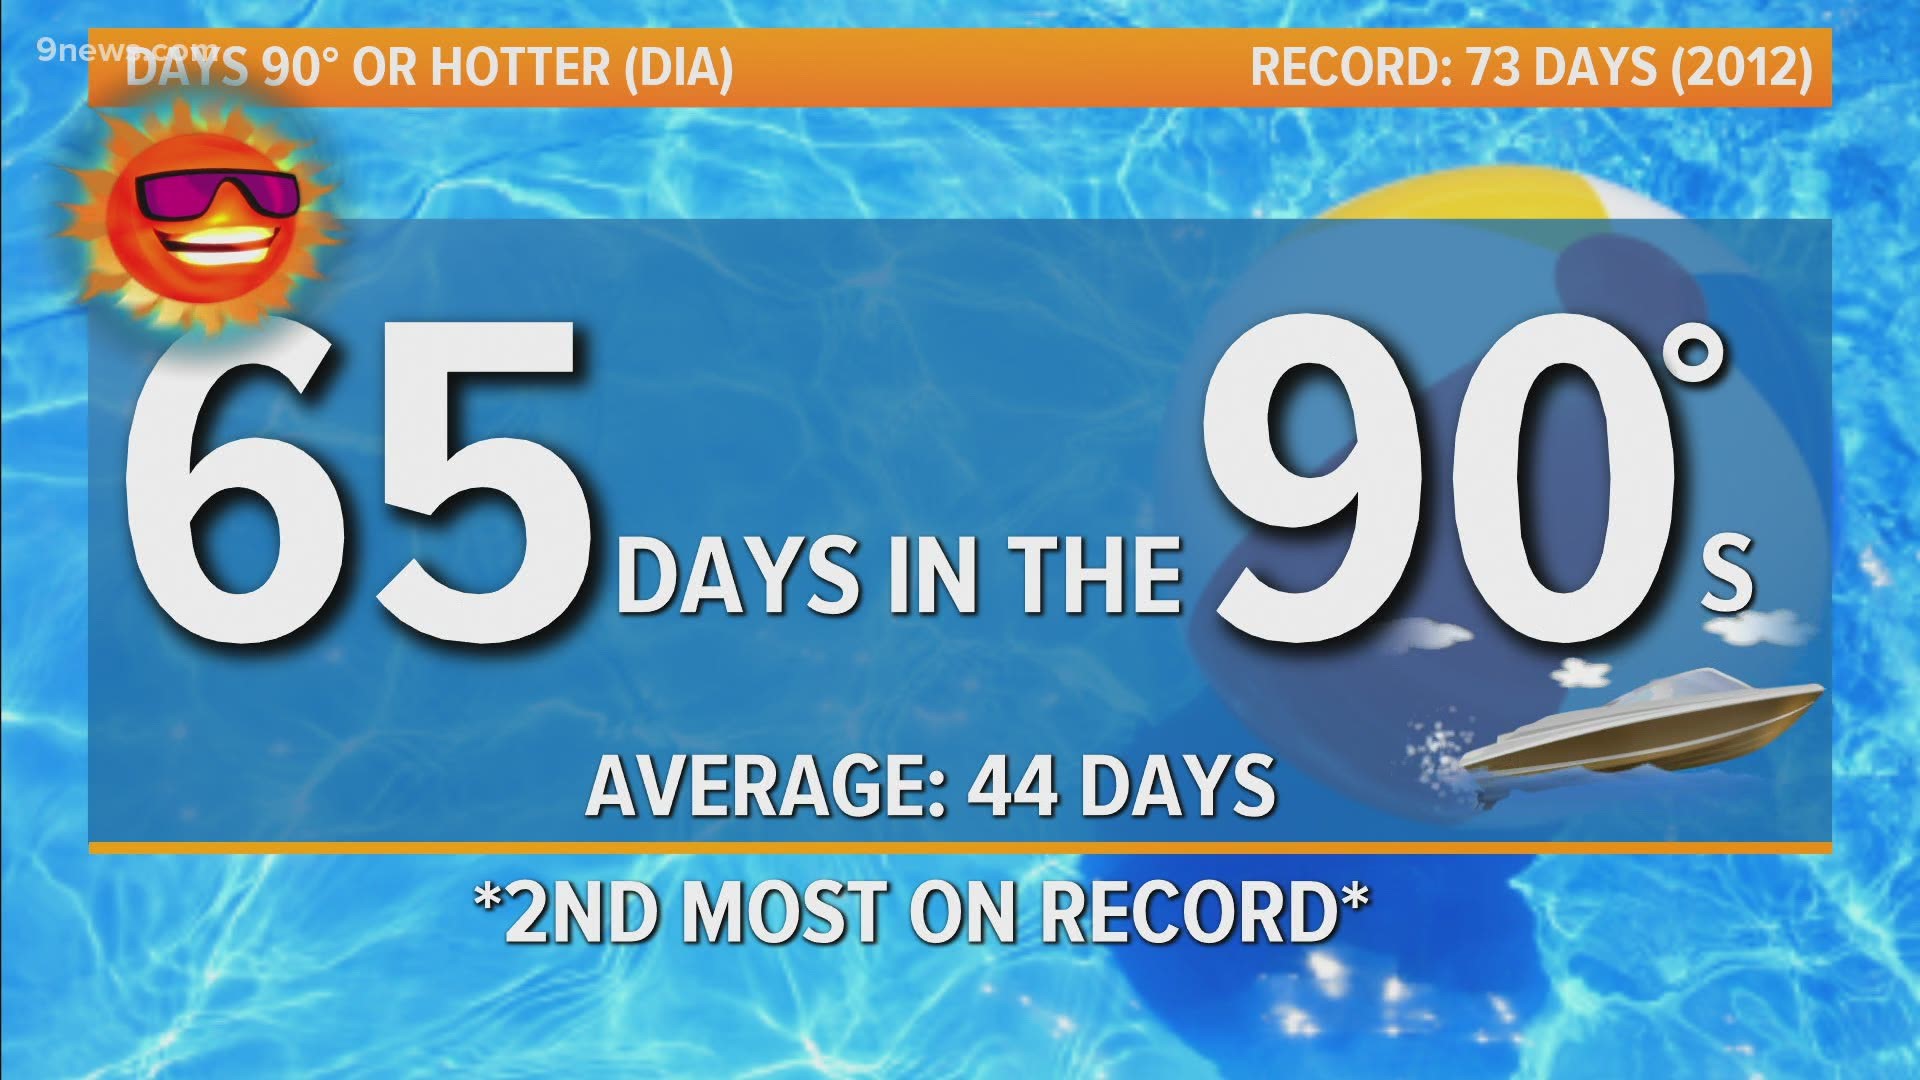 Denver is officially in the No. 2 spot for the most 90 degree days on record.